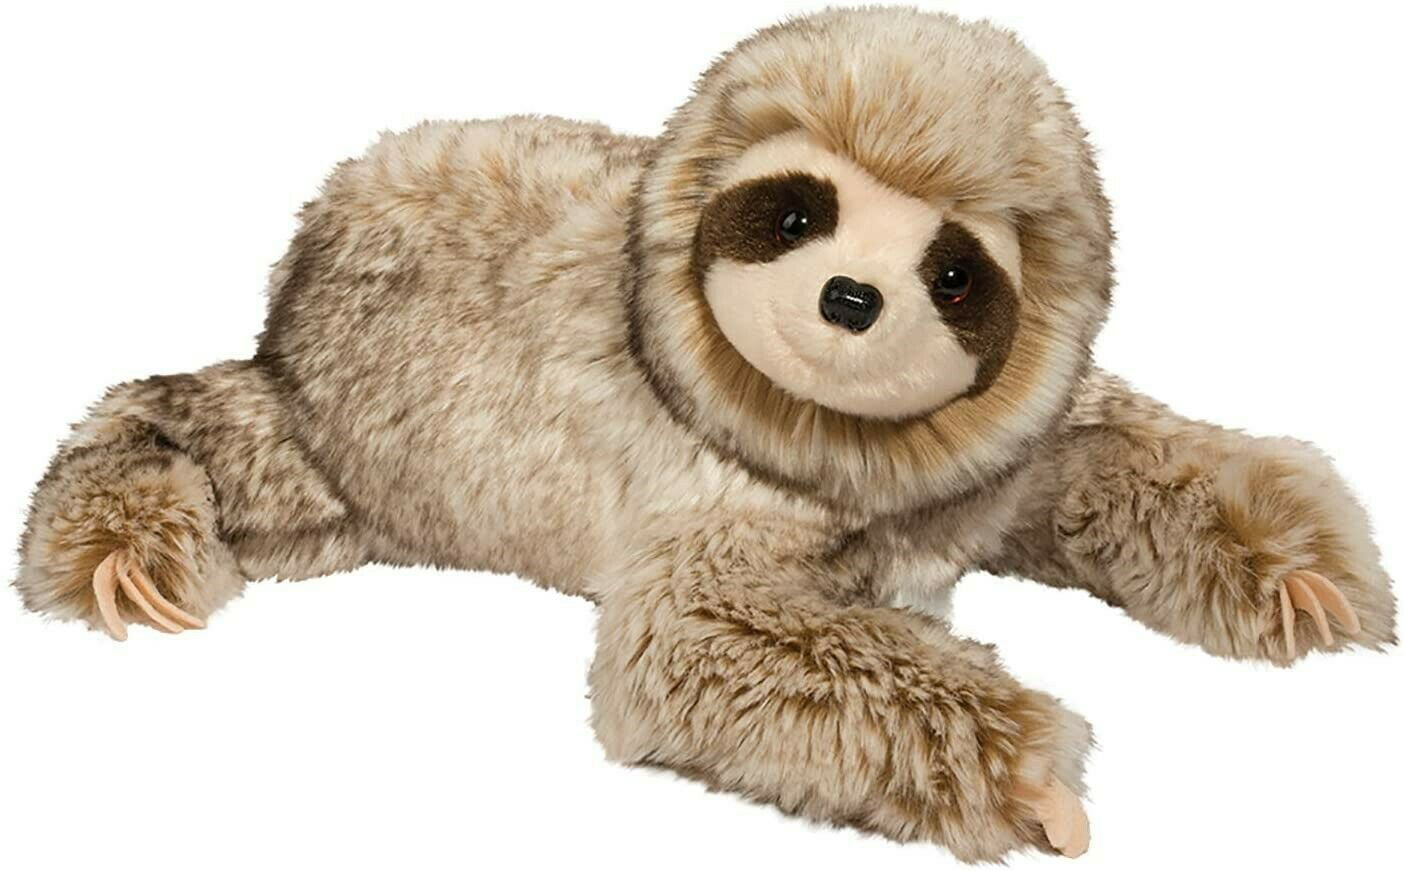 Winsterch Fluffy Sloth Stuffed Animal Toy Gift For Kids Large 